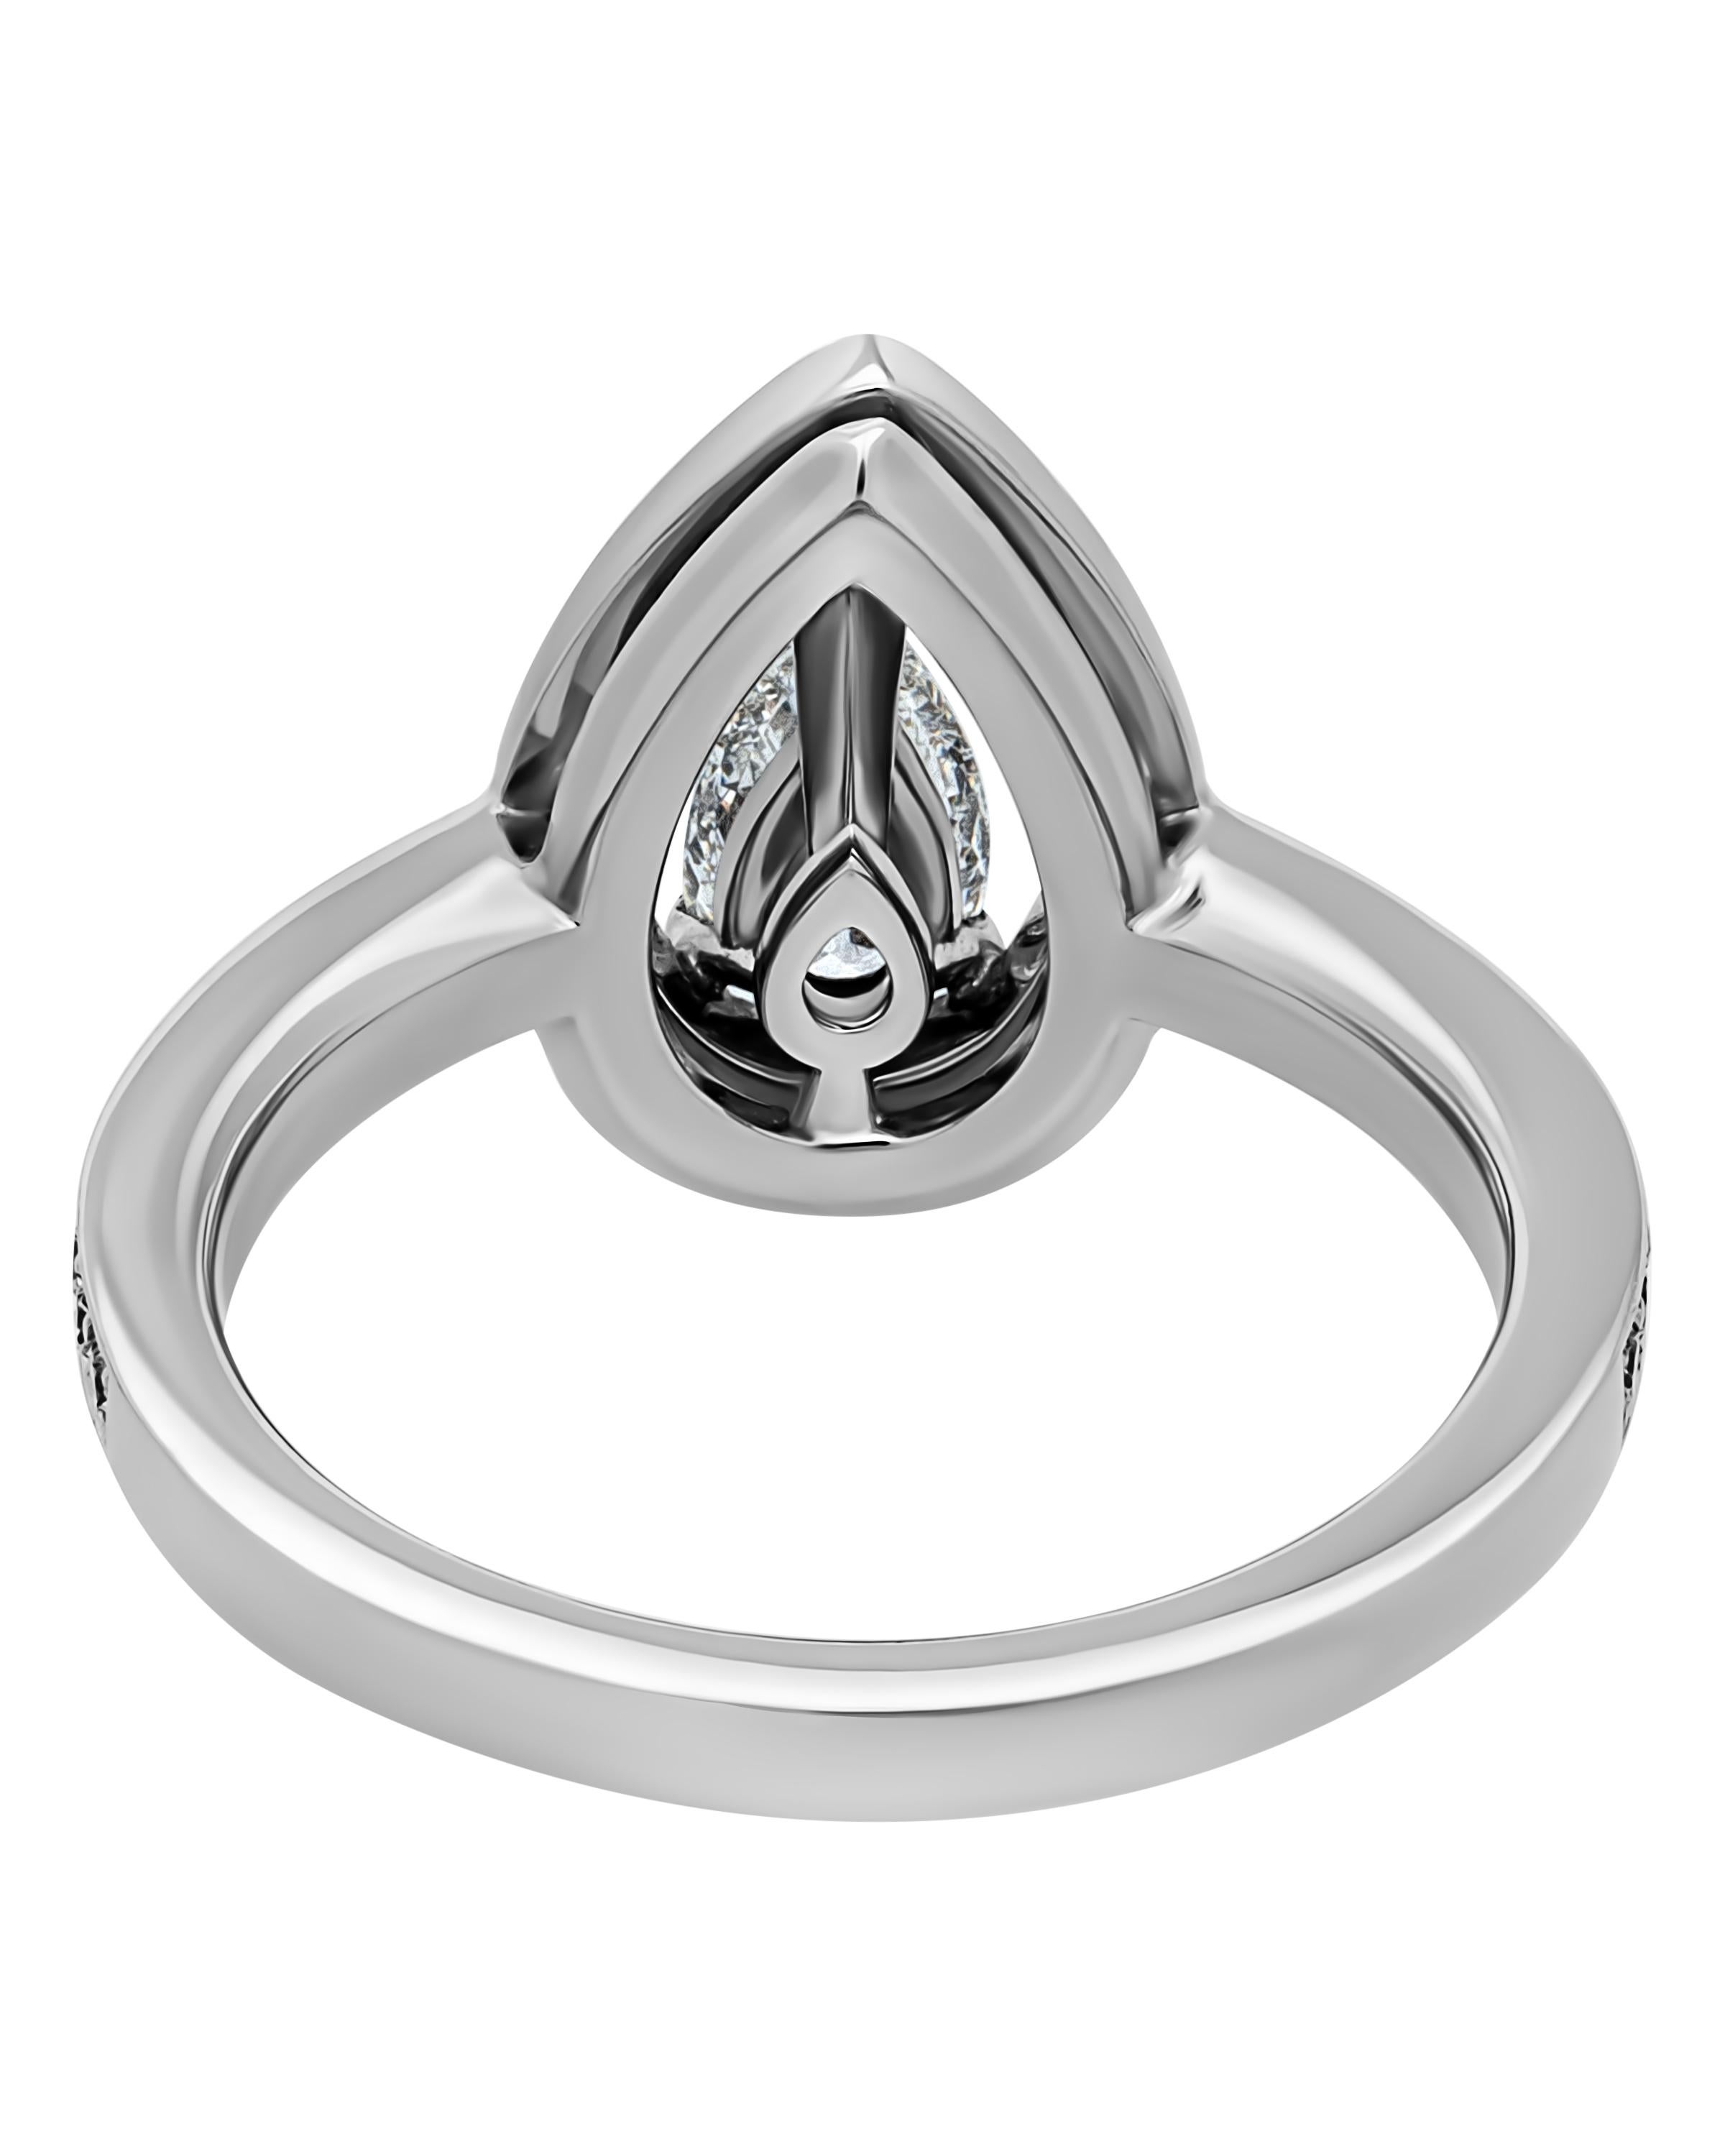 Contemporary FRED Lovelight Platinum Diamond Engagement Ring sz 5.75 For Sale